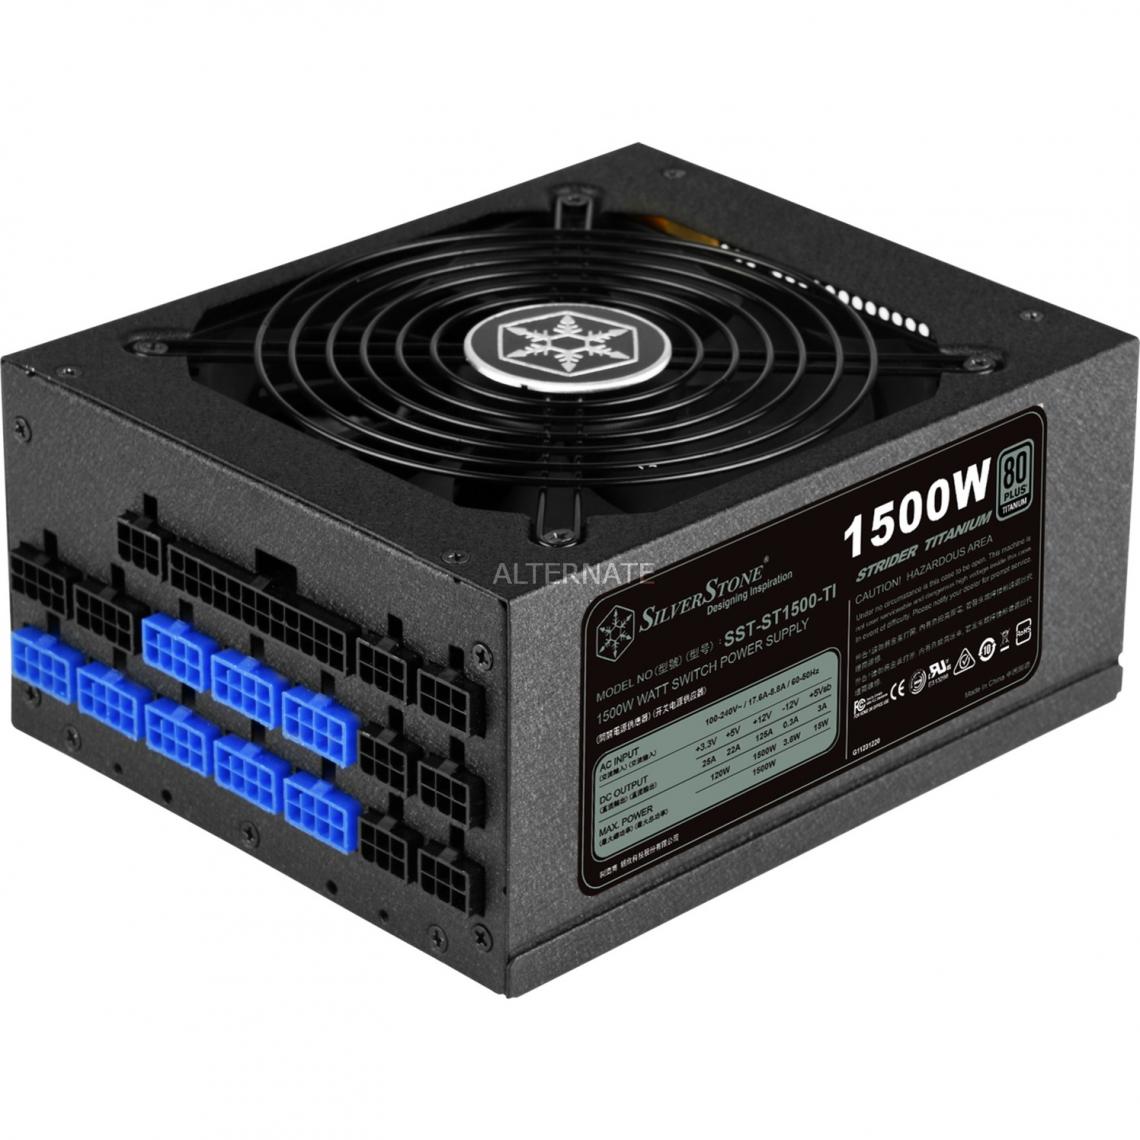 Silverstone - SST-ST1500-TI - Alimentation modulaire